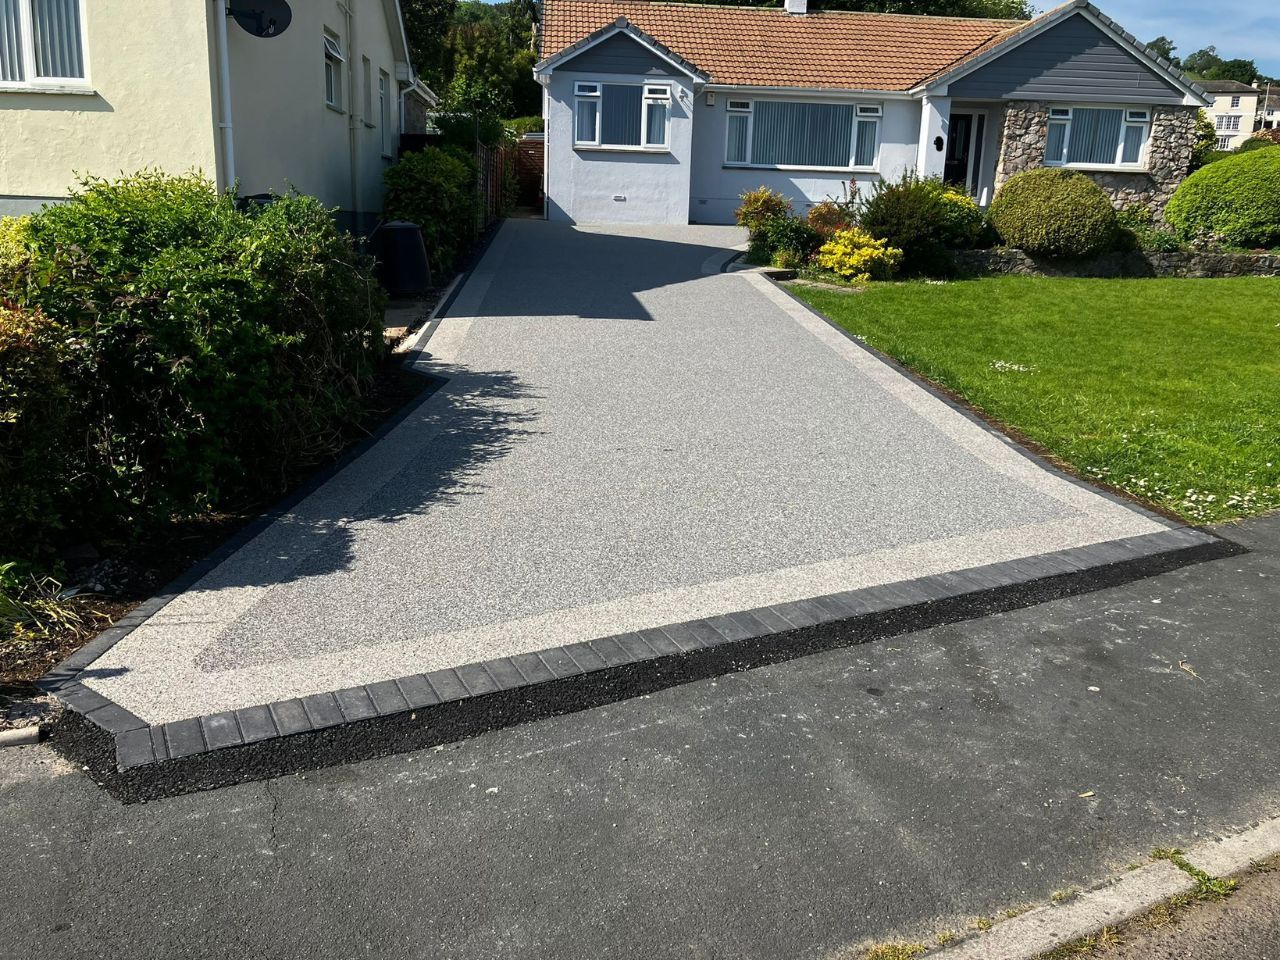 Newly completed resin driveway in a grey and white colour.